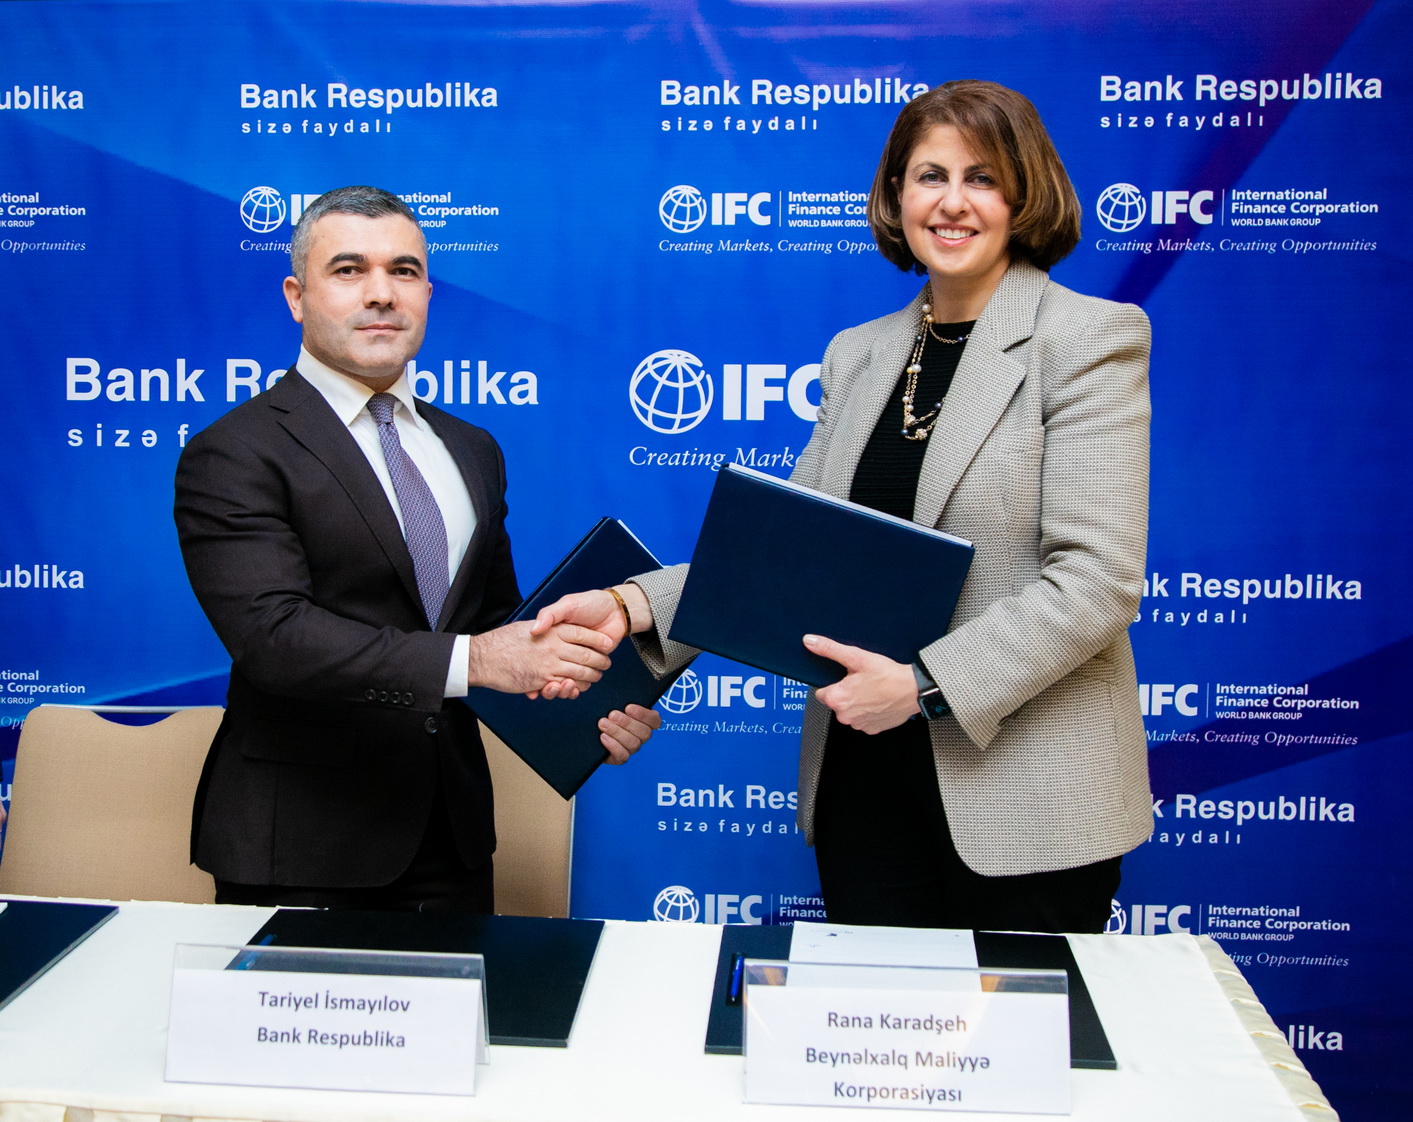 IFC’s Support to Help Boost Financing for Smaller Businesses and Women Entrepreneurs at Bank Respublika